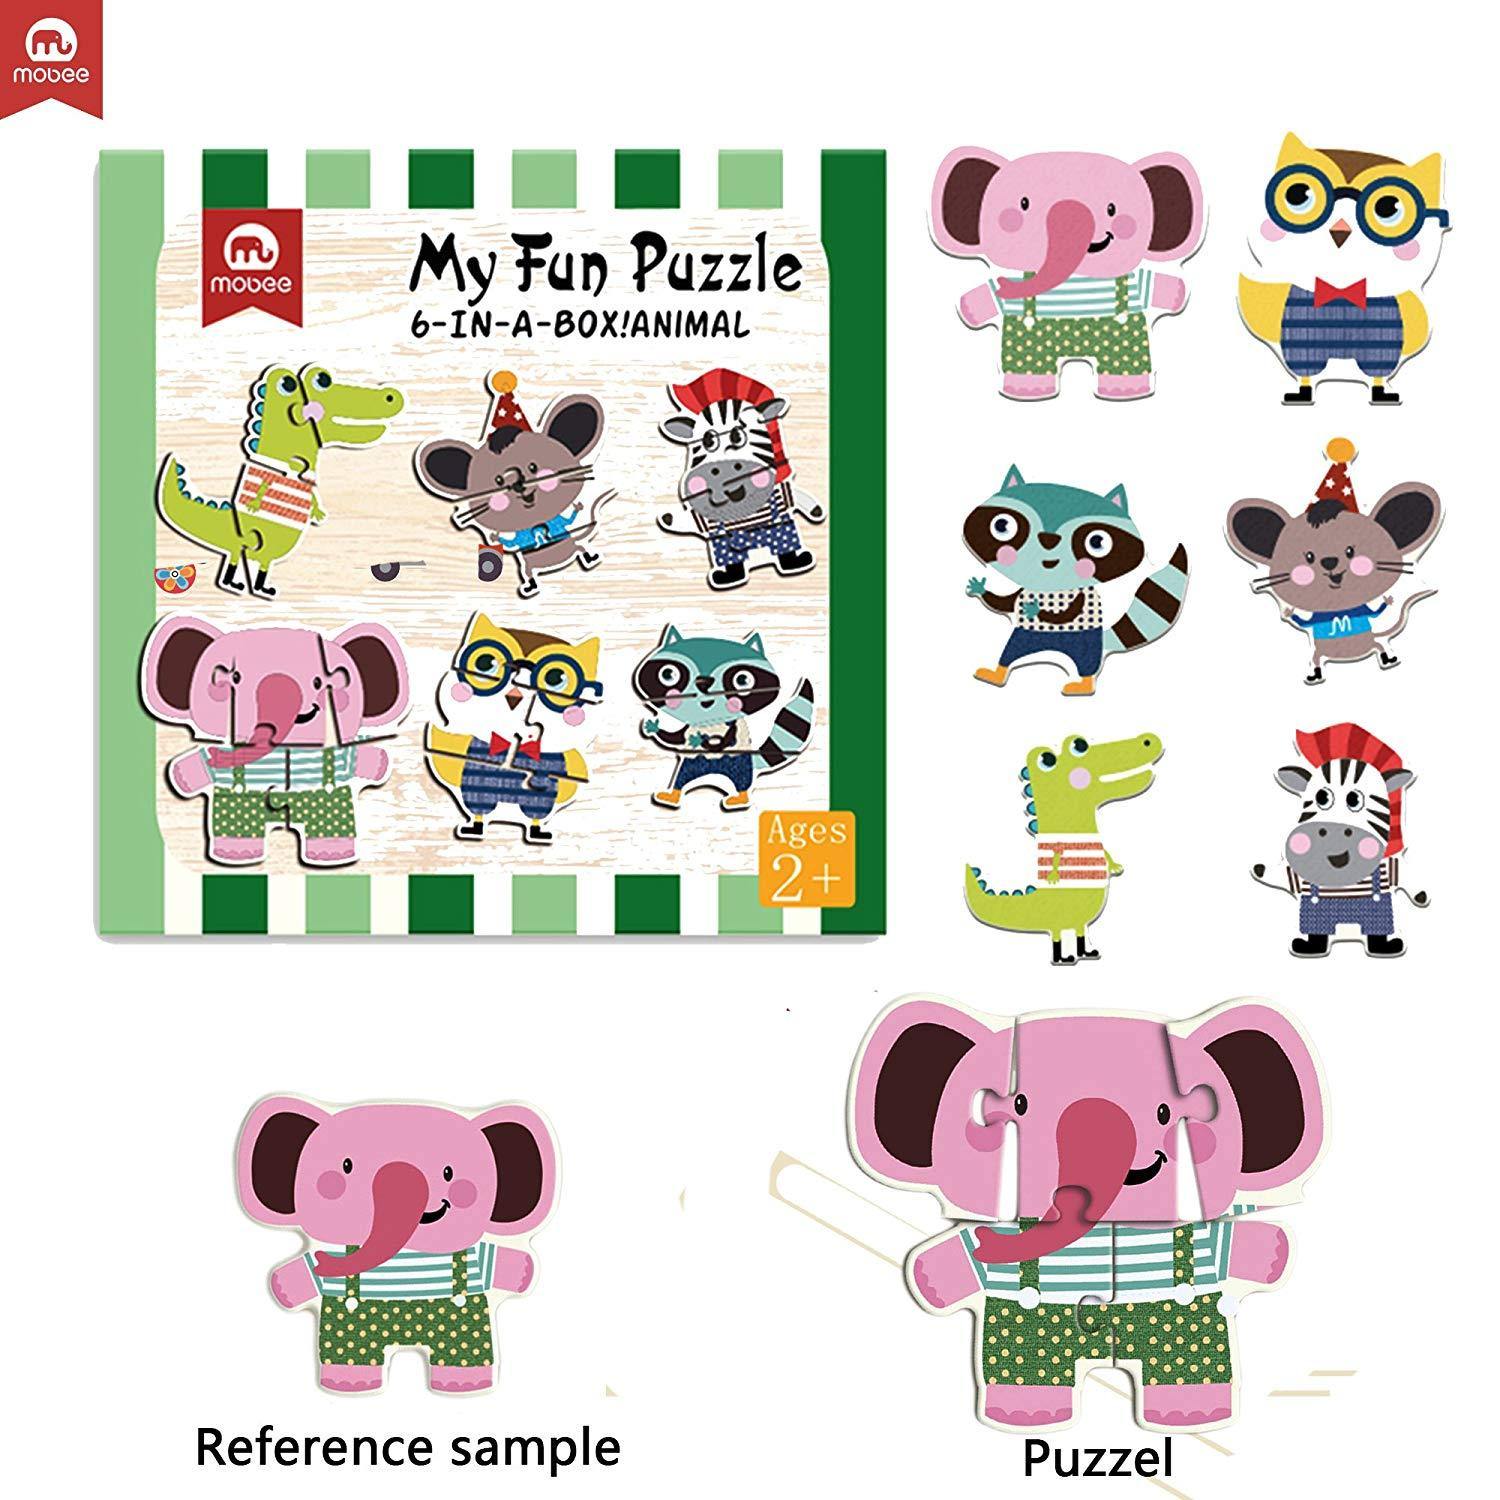 Bosonshop 6-in-1 Educational Jigsaw Puzzles with Reference Sample for Preschool Kids, Circus Puzzle